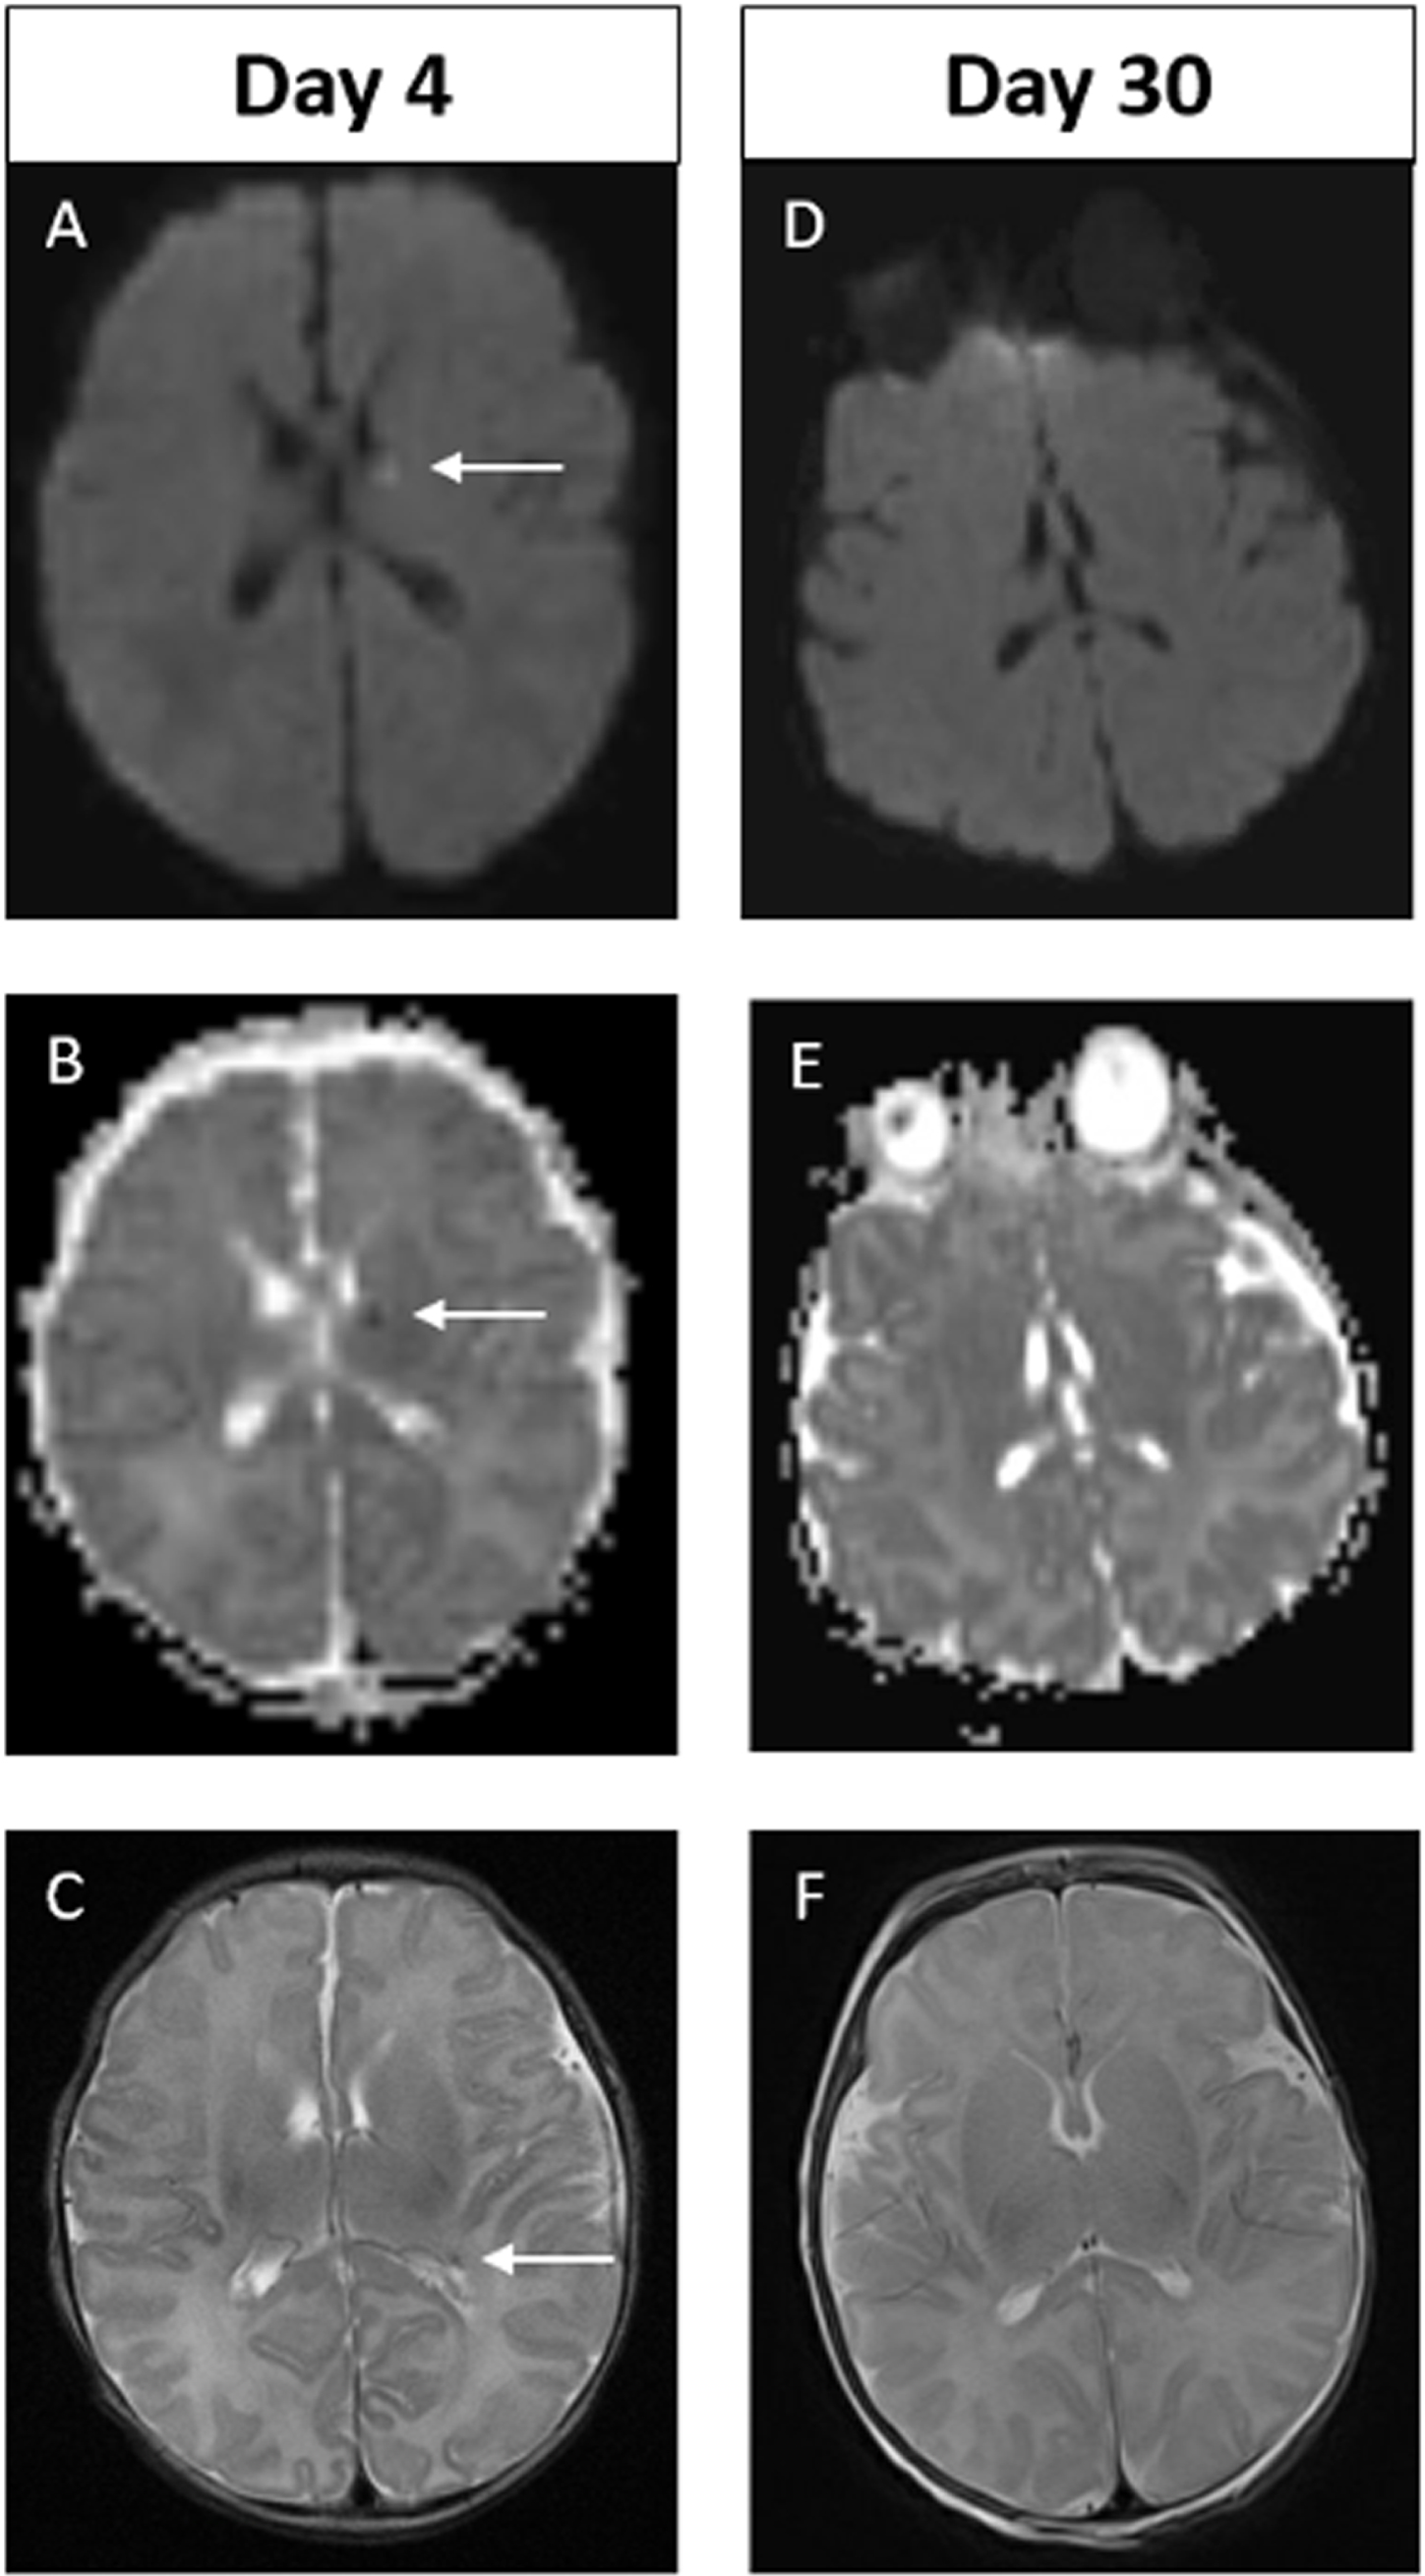 Example of MRI images of abnormal early scan and normal late scan. Images A-C on Day 4. Images D-F on Day 30. In the early scan, punctate focus of diffusion restriction in the anterior, superior aspect of left thalamus is seen on DWI (A) and on ADC (B). Punctate focus of low signal intensity at left lateral ventricular atrium seen on axial T2 weighted image (C). These findings are not evident on the late scan (D-F). Of note, there are technical differences in alignment between the two scans.